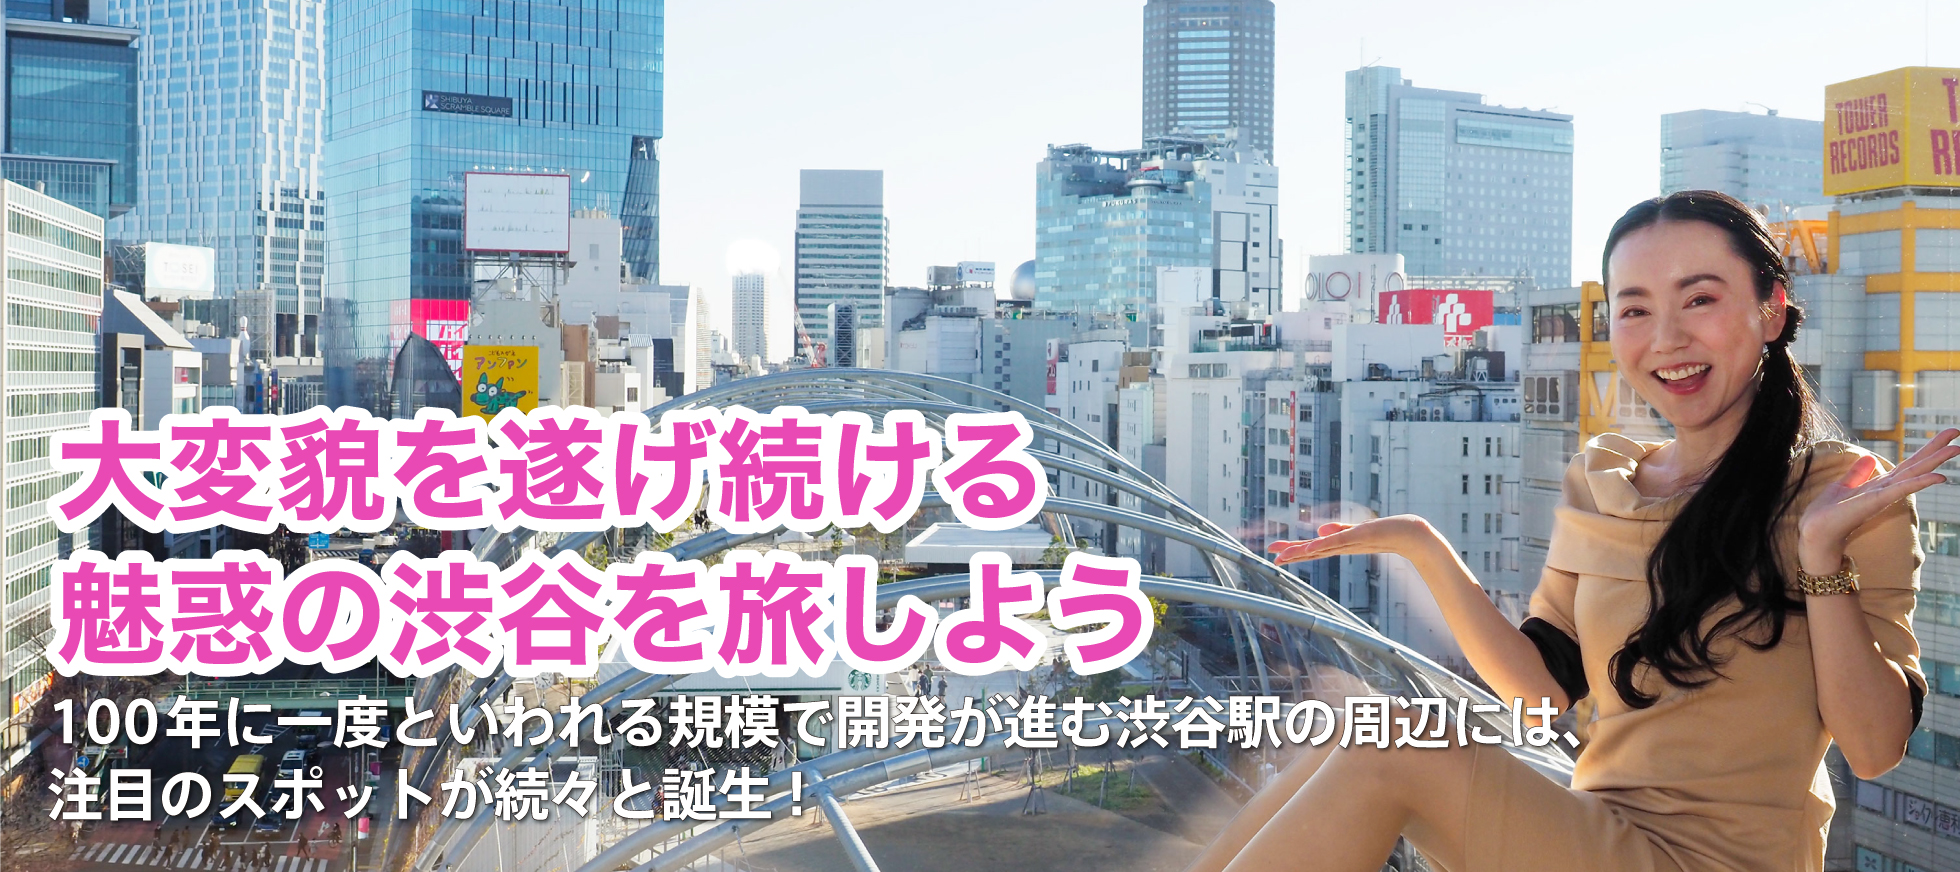 Let's travel to the enchanting Shibuya, which continues to undergo major transformations Around Shibuya Station, where development is progressing on a scale that is said to occur once every 100 years, attention-grabbing spots are opening one after another!